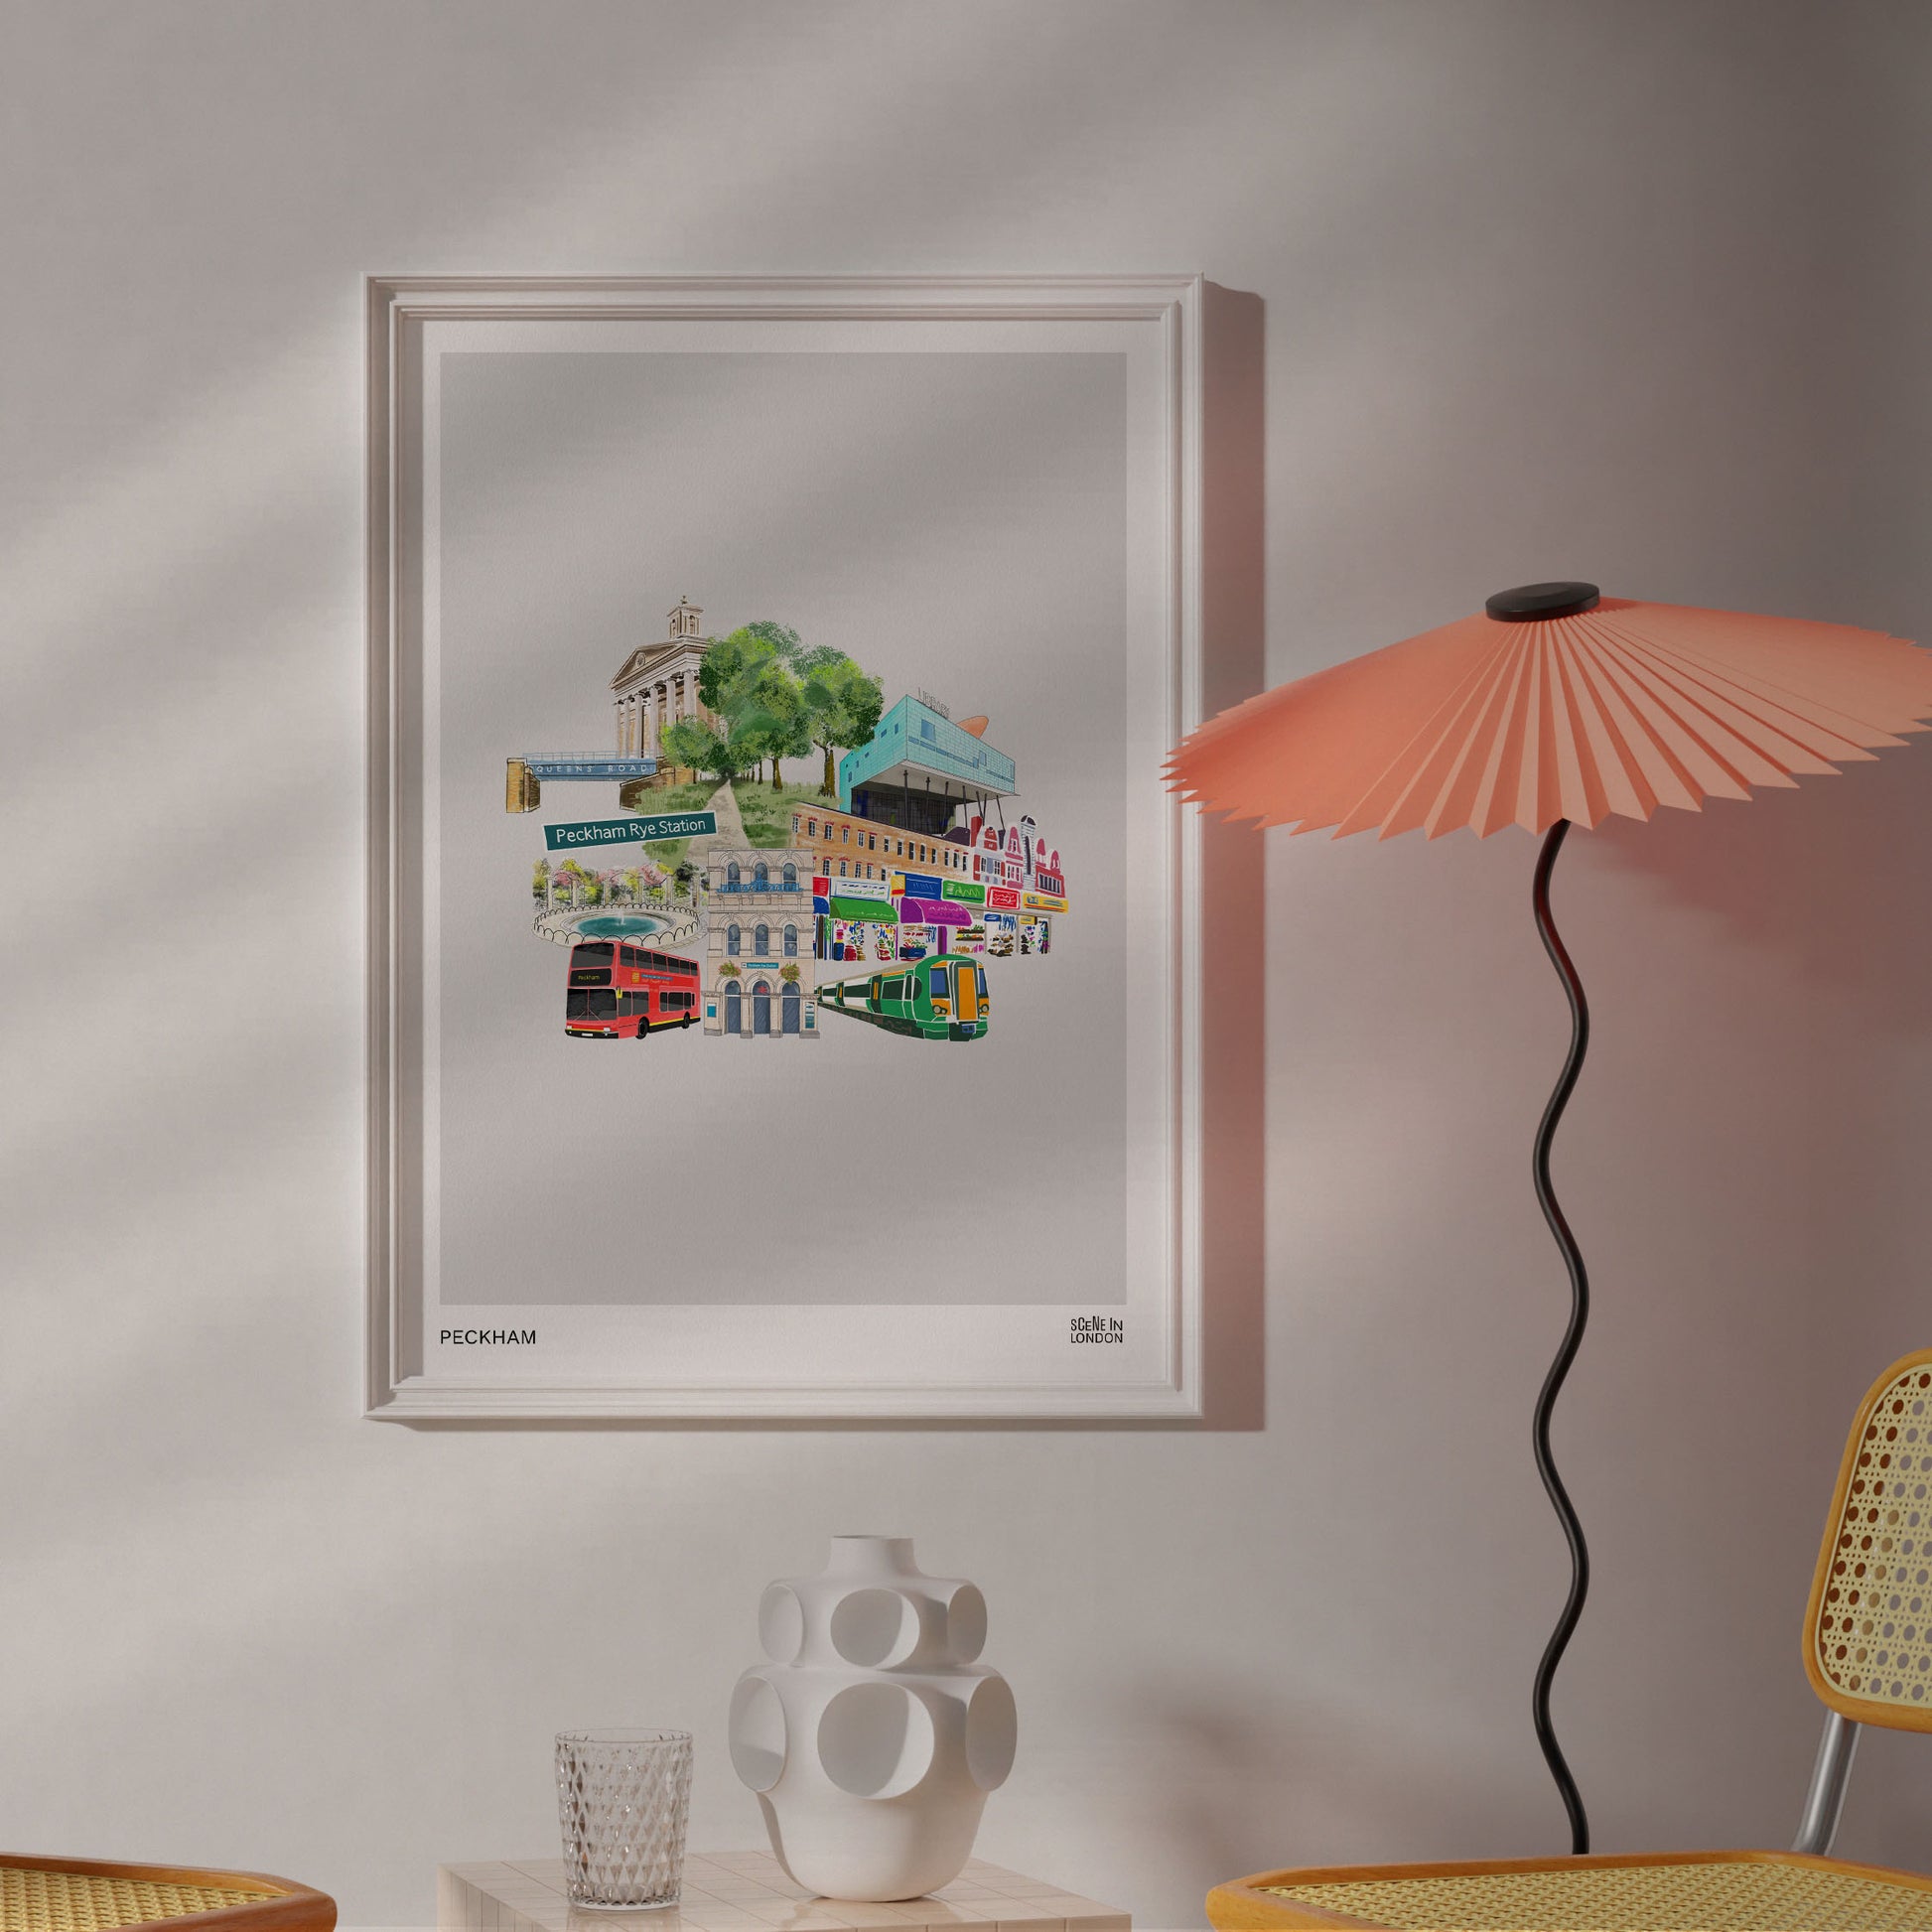 Peckham London wall art print with places in Peckham